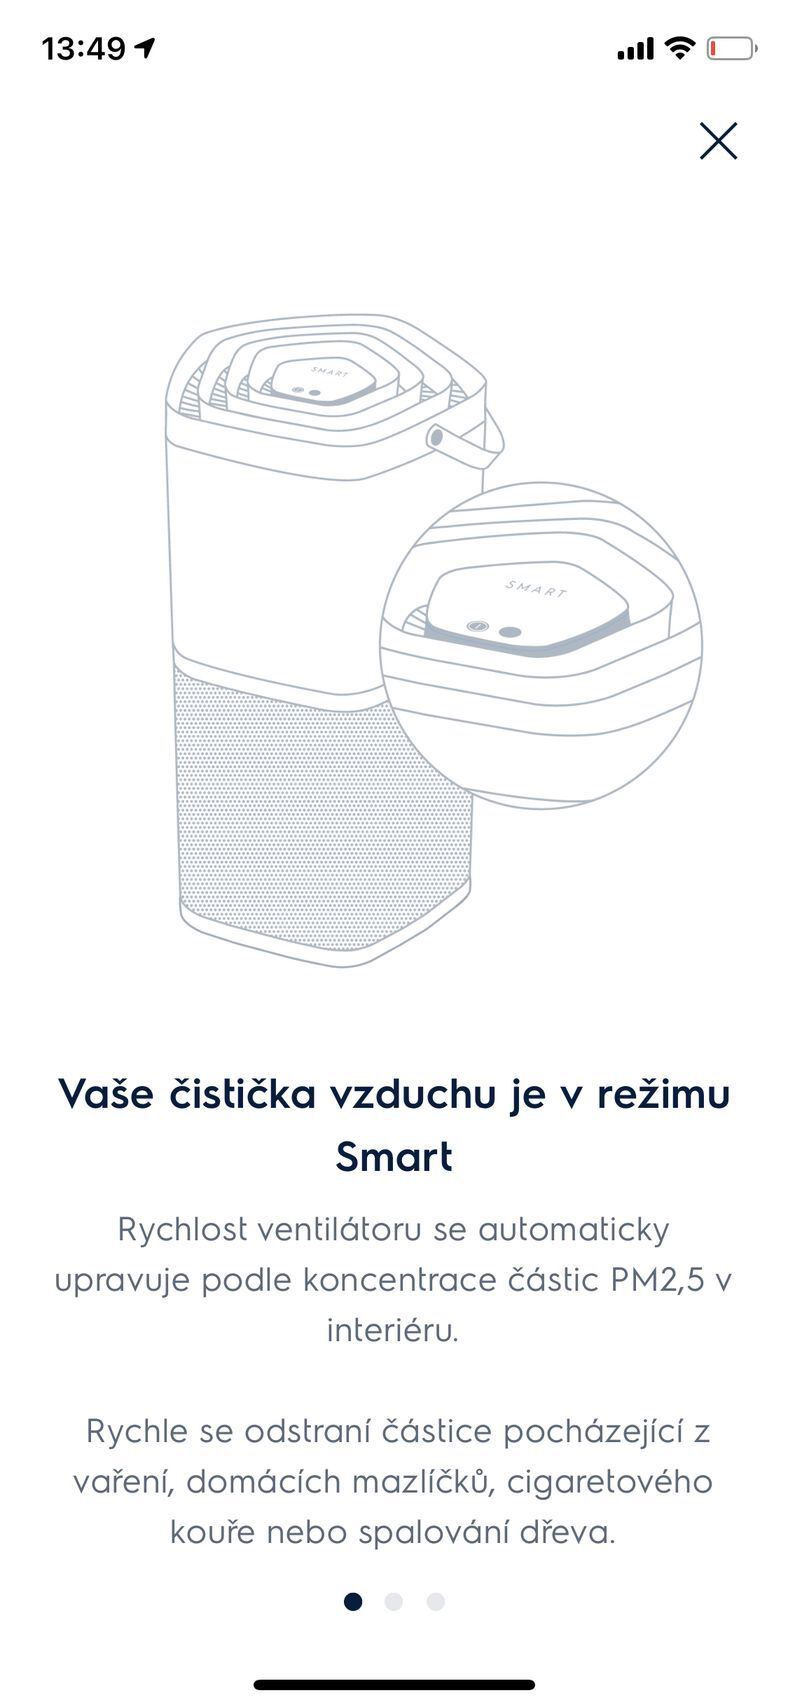 Electrolux Wellbeing